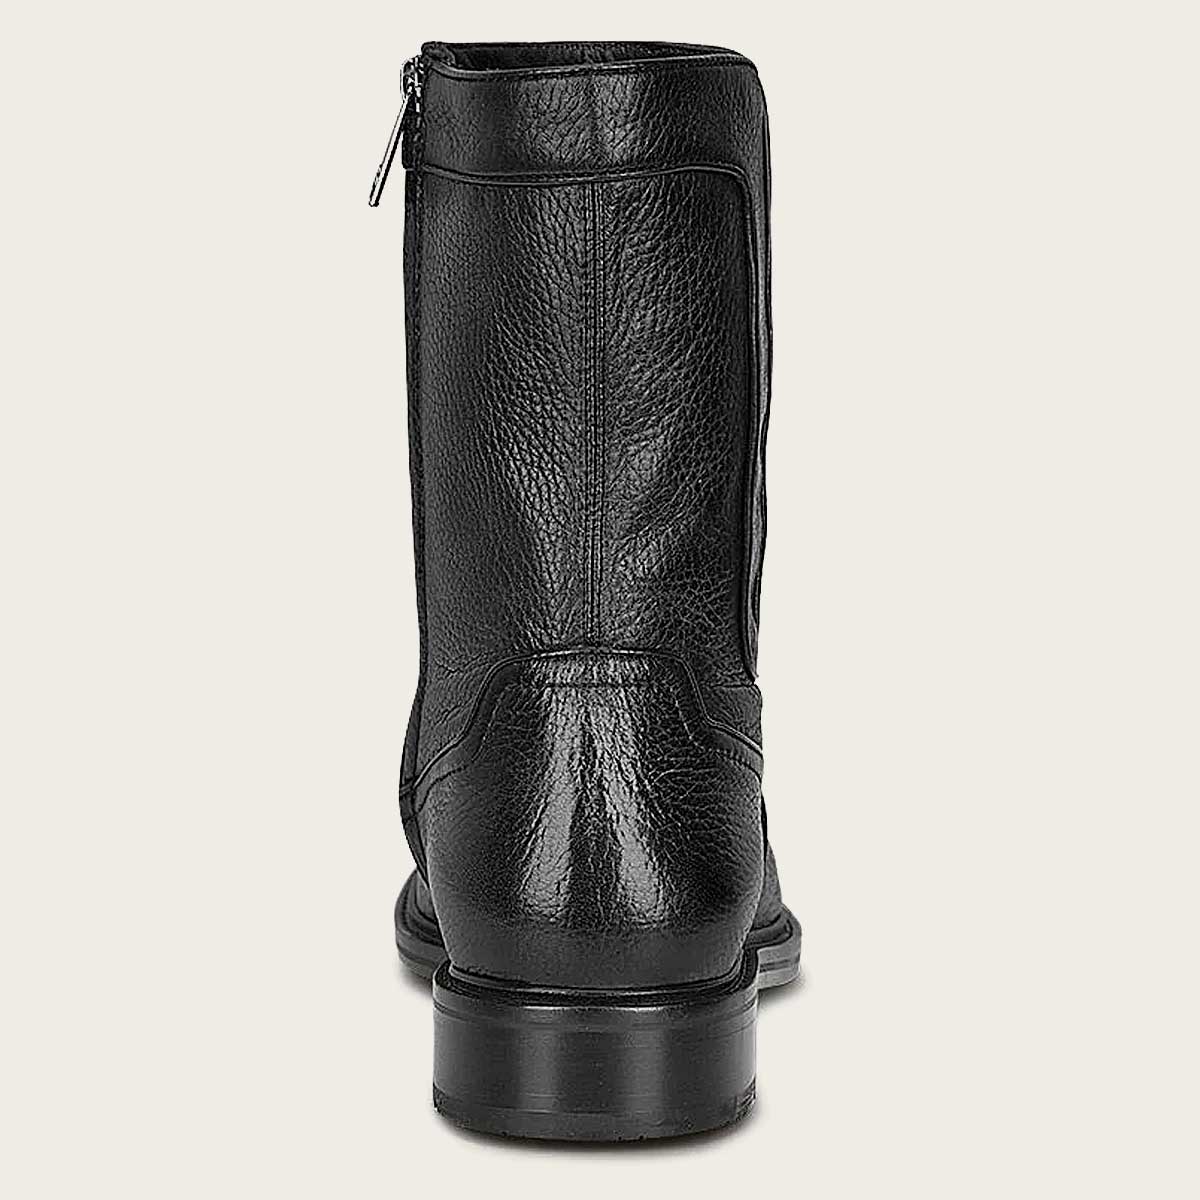 Hand-painted black leather dress boot